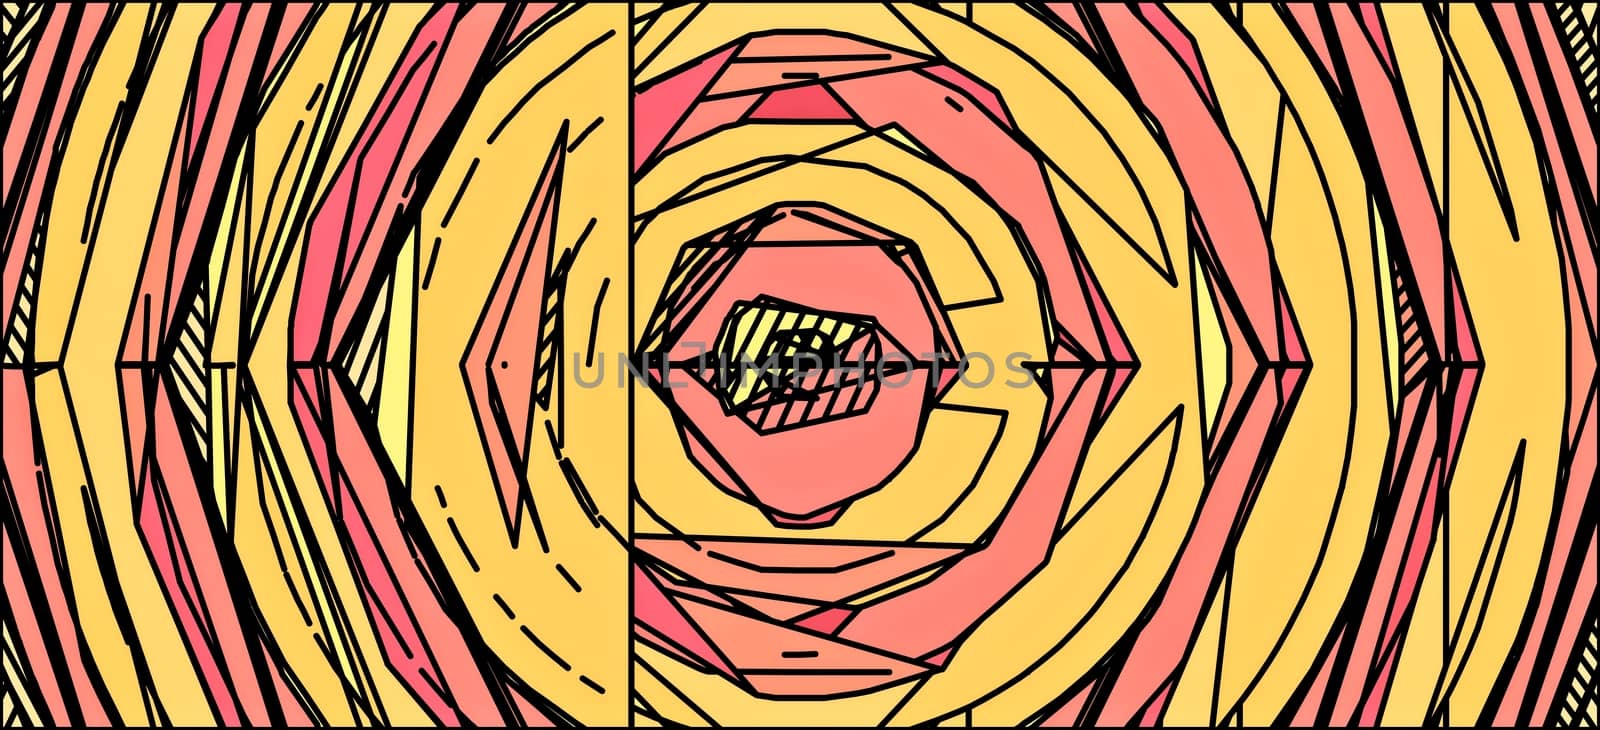 drawing abstract background with pink and yellow color